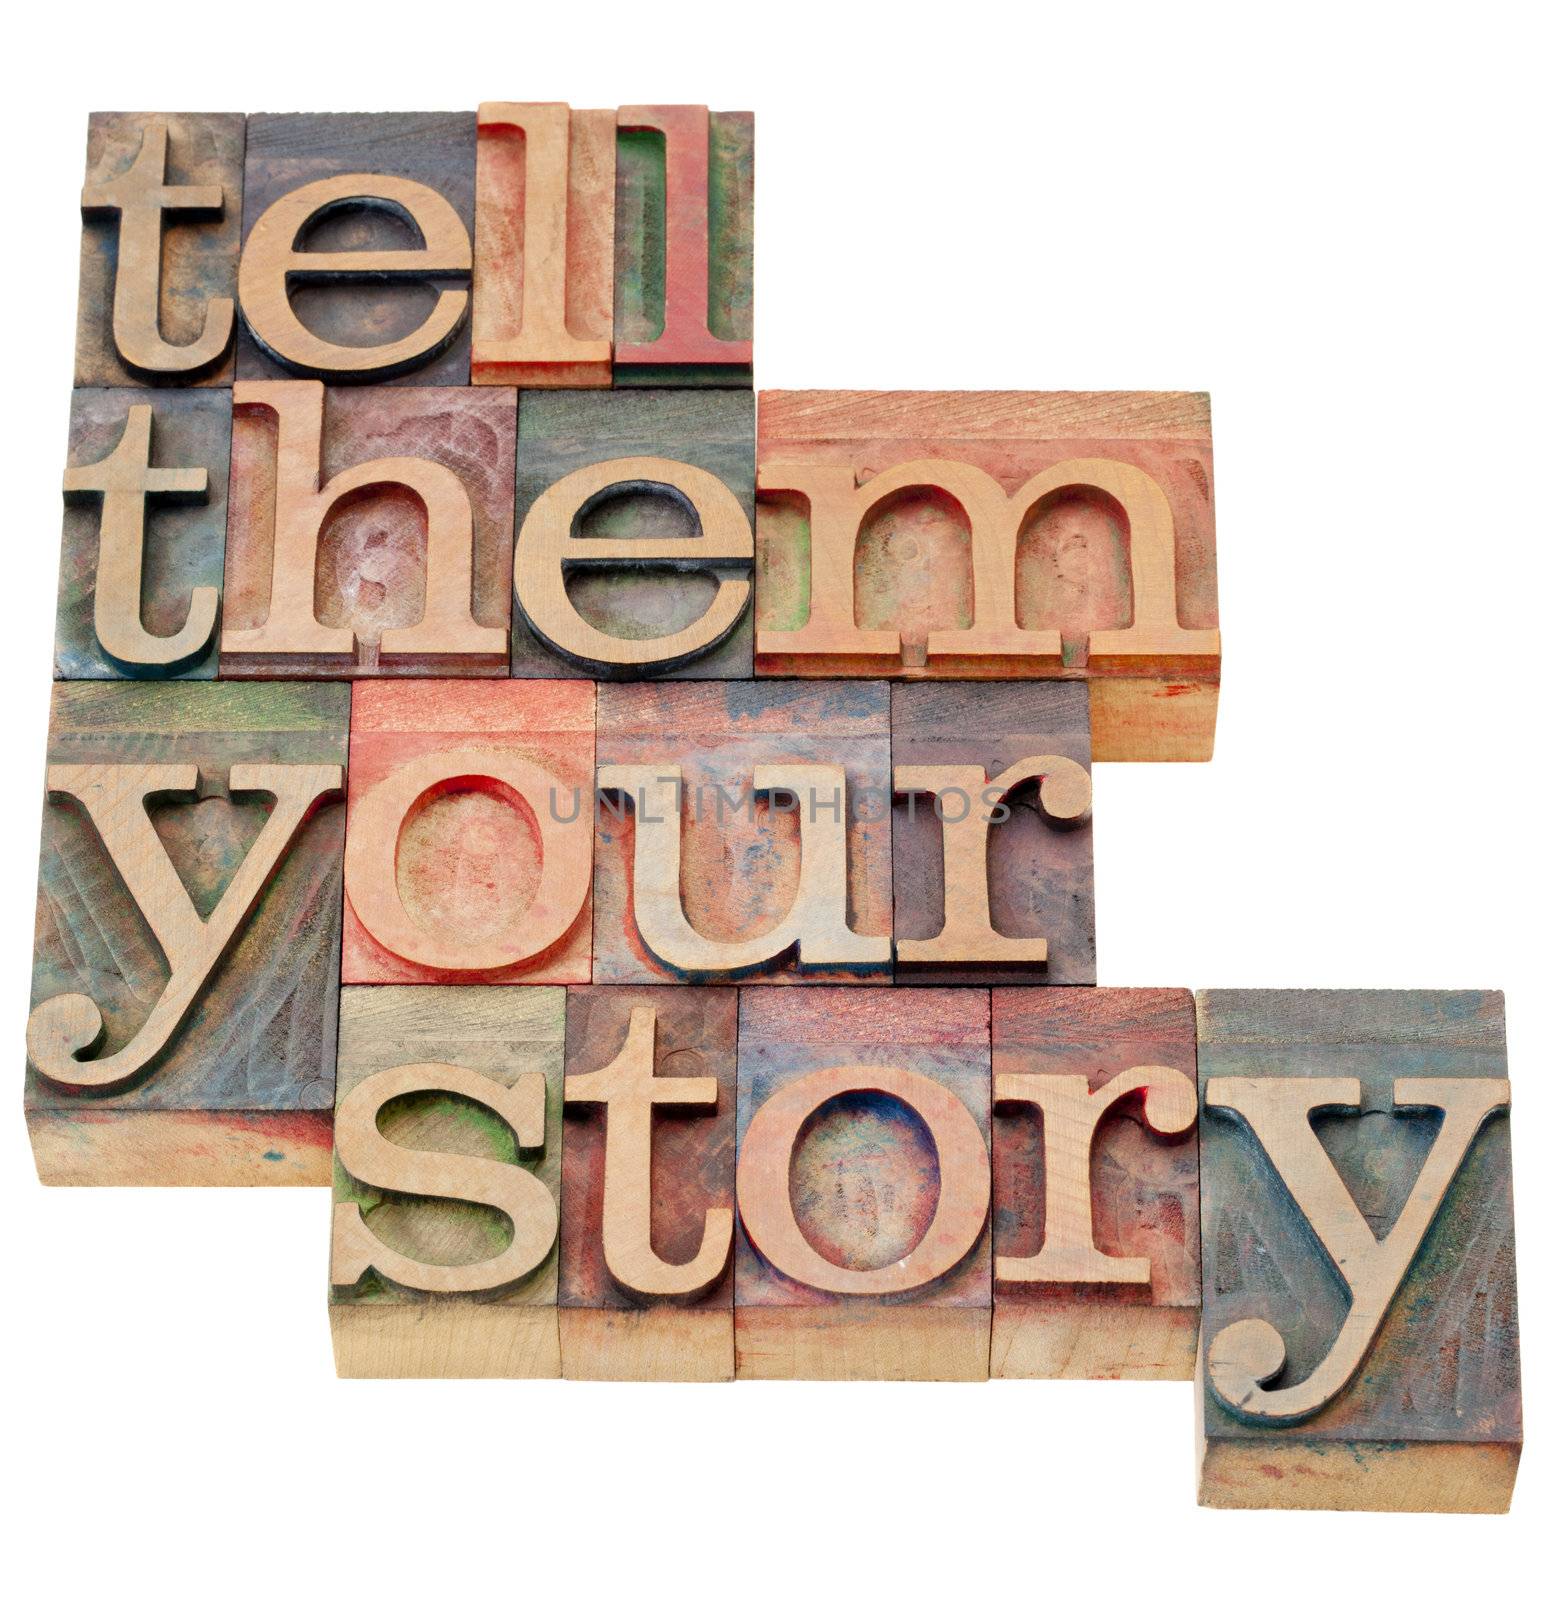 tell them your story by PixelsAway